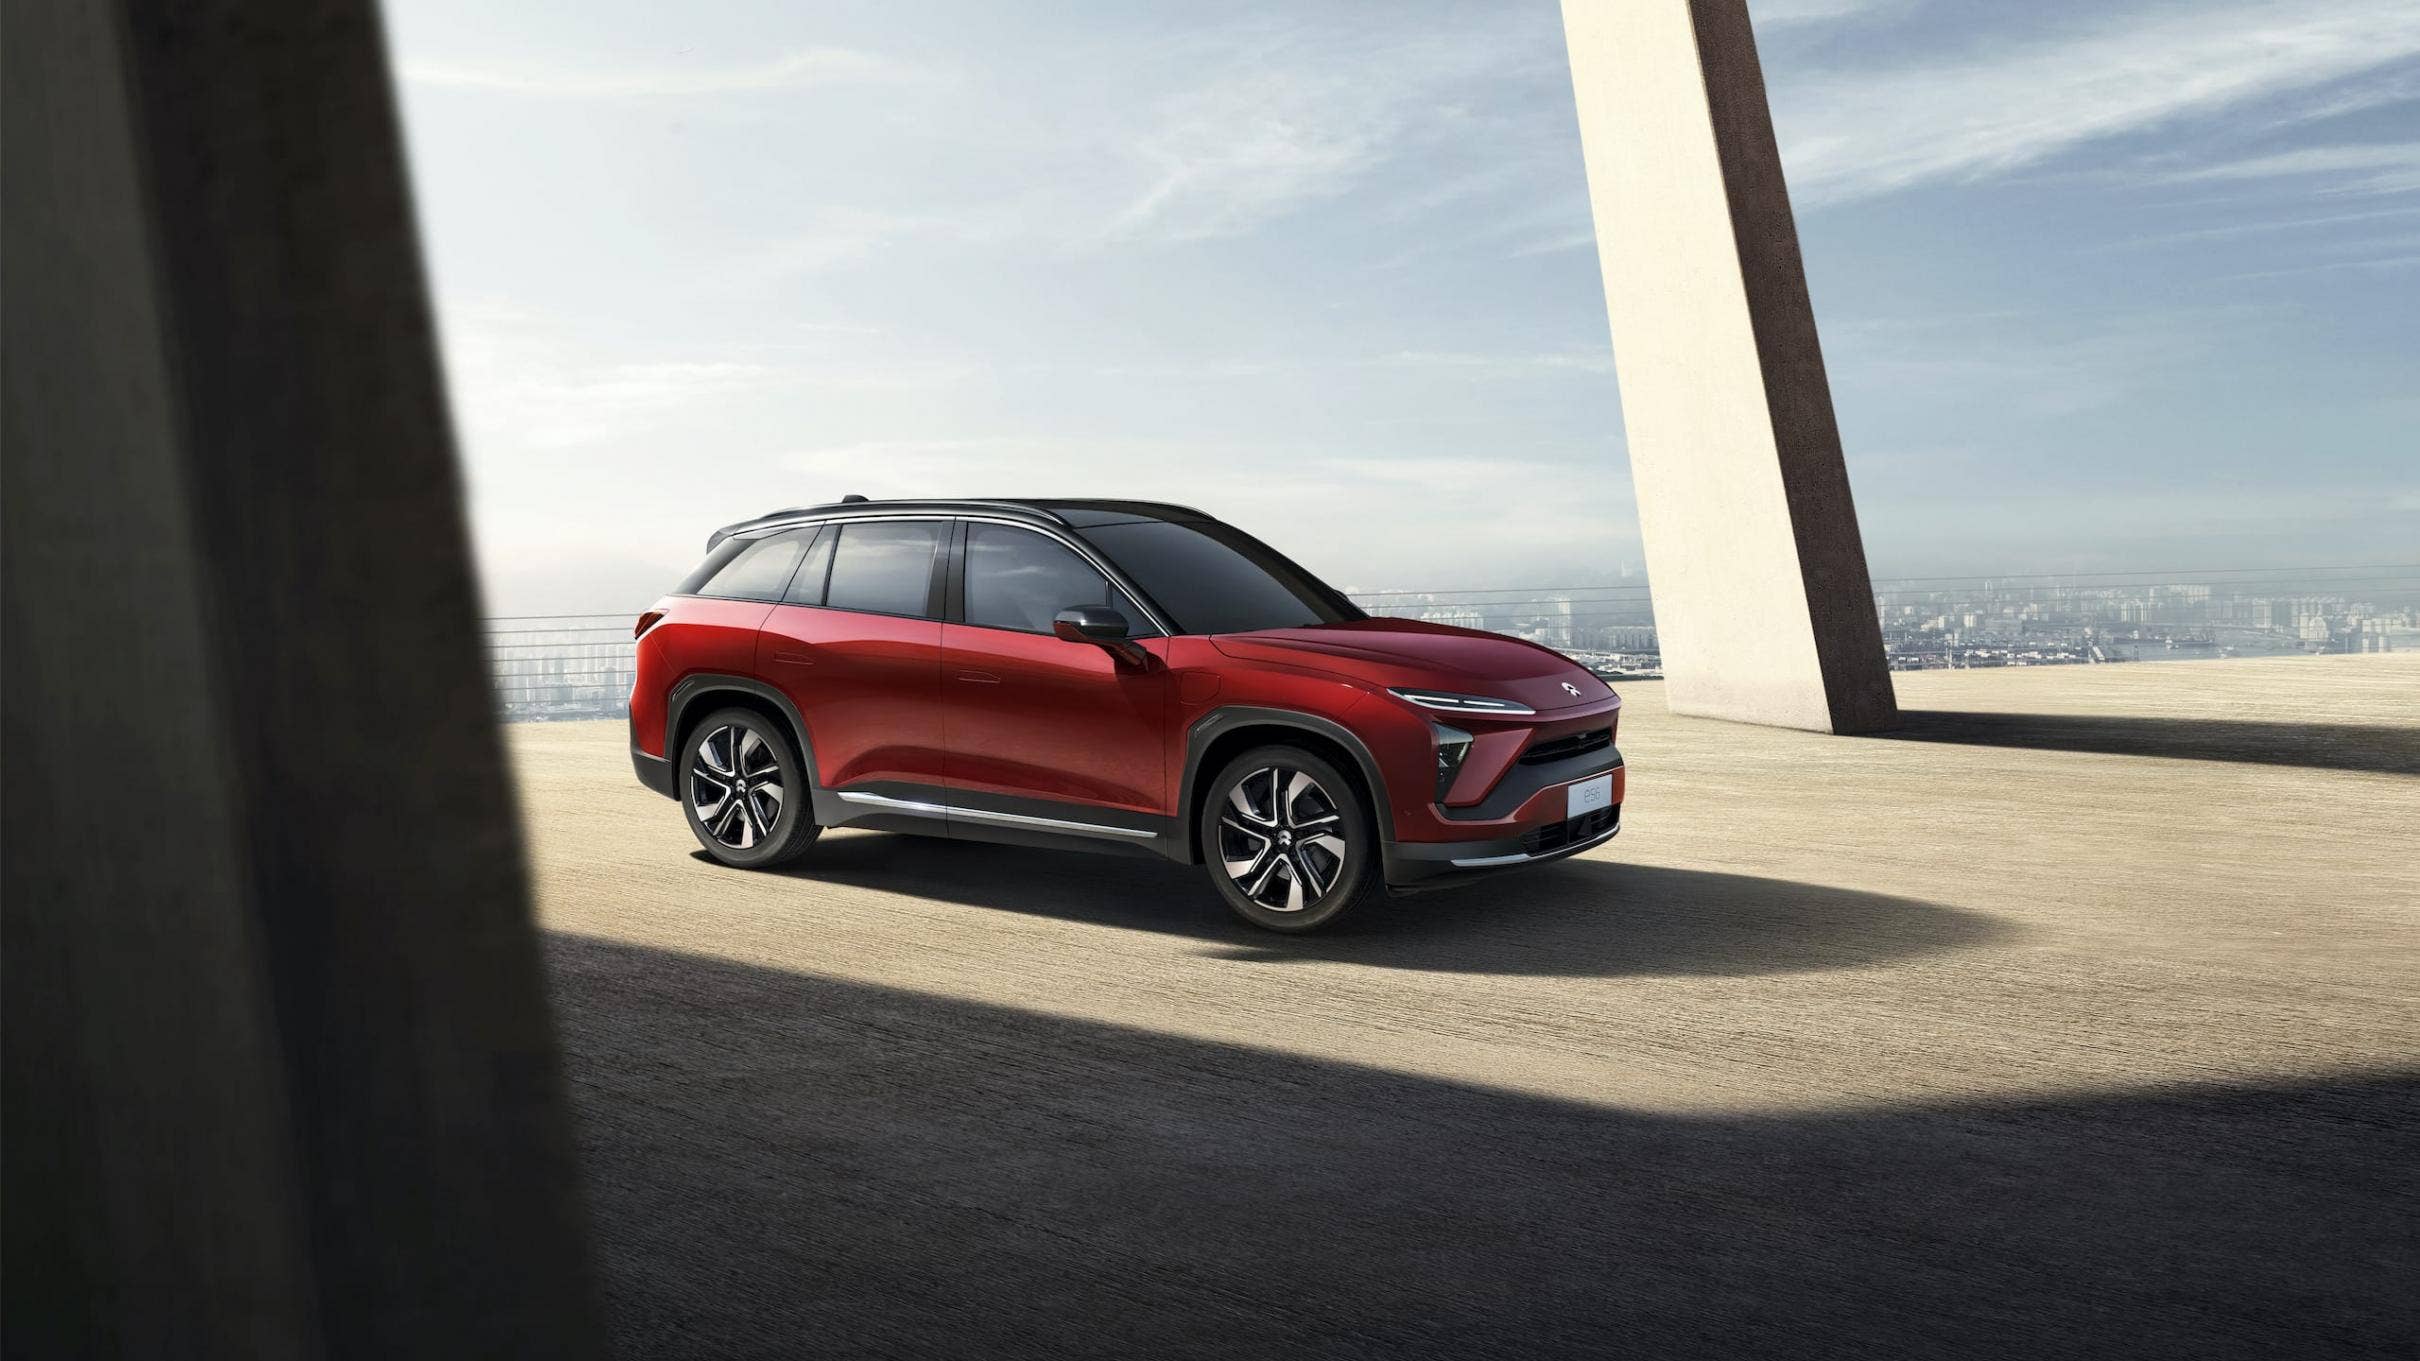 What's Ailing Nio? Chinese EV Stock Underperforms Domestic Peers In August